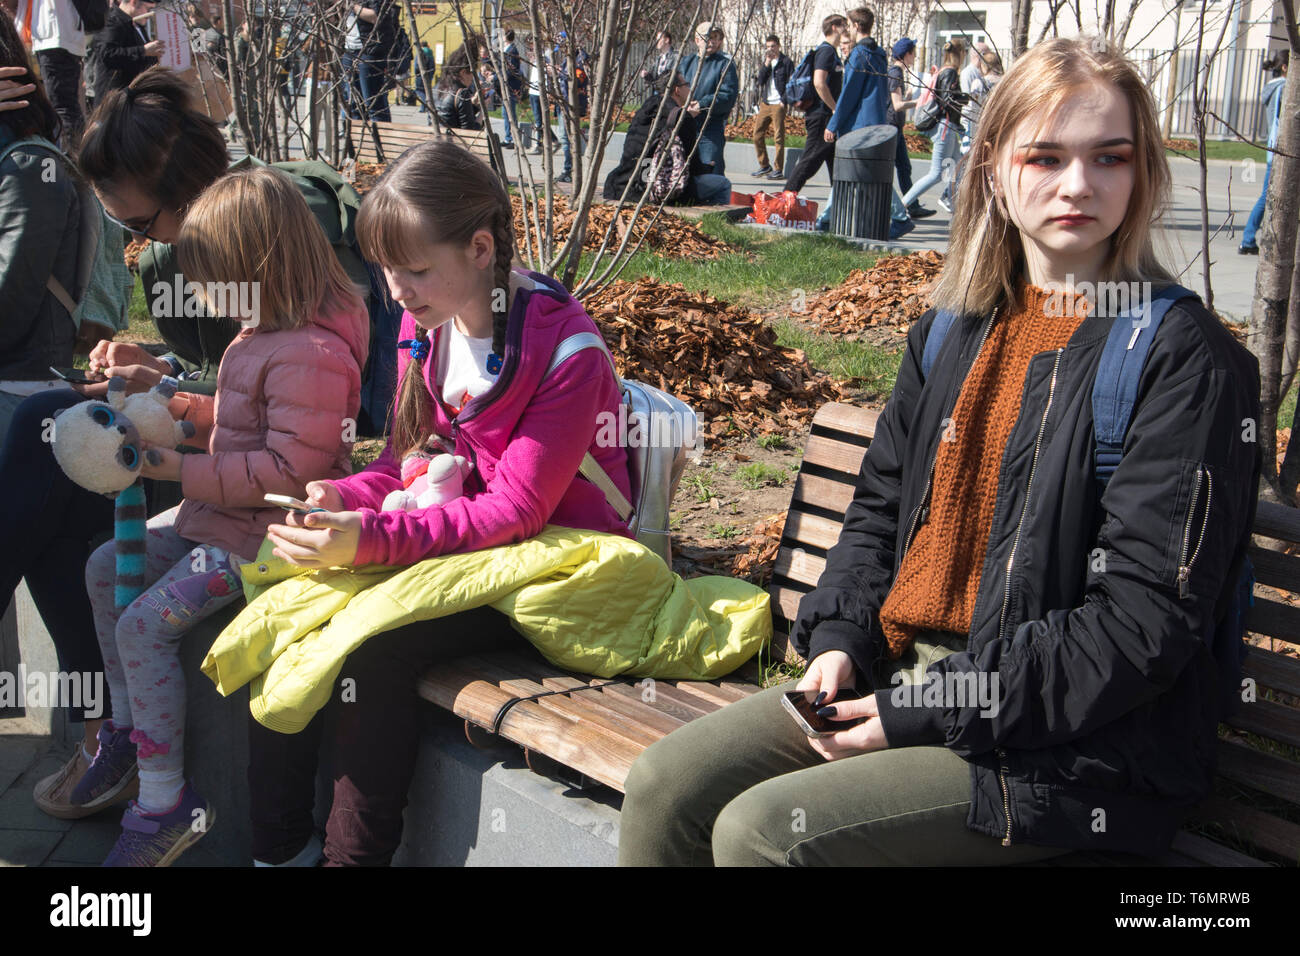 Moscow, RUSSIA - MAY 1, 2019: Blonde girl sitting on a bench Stock Photo